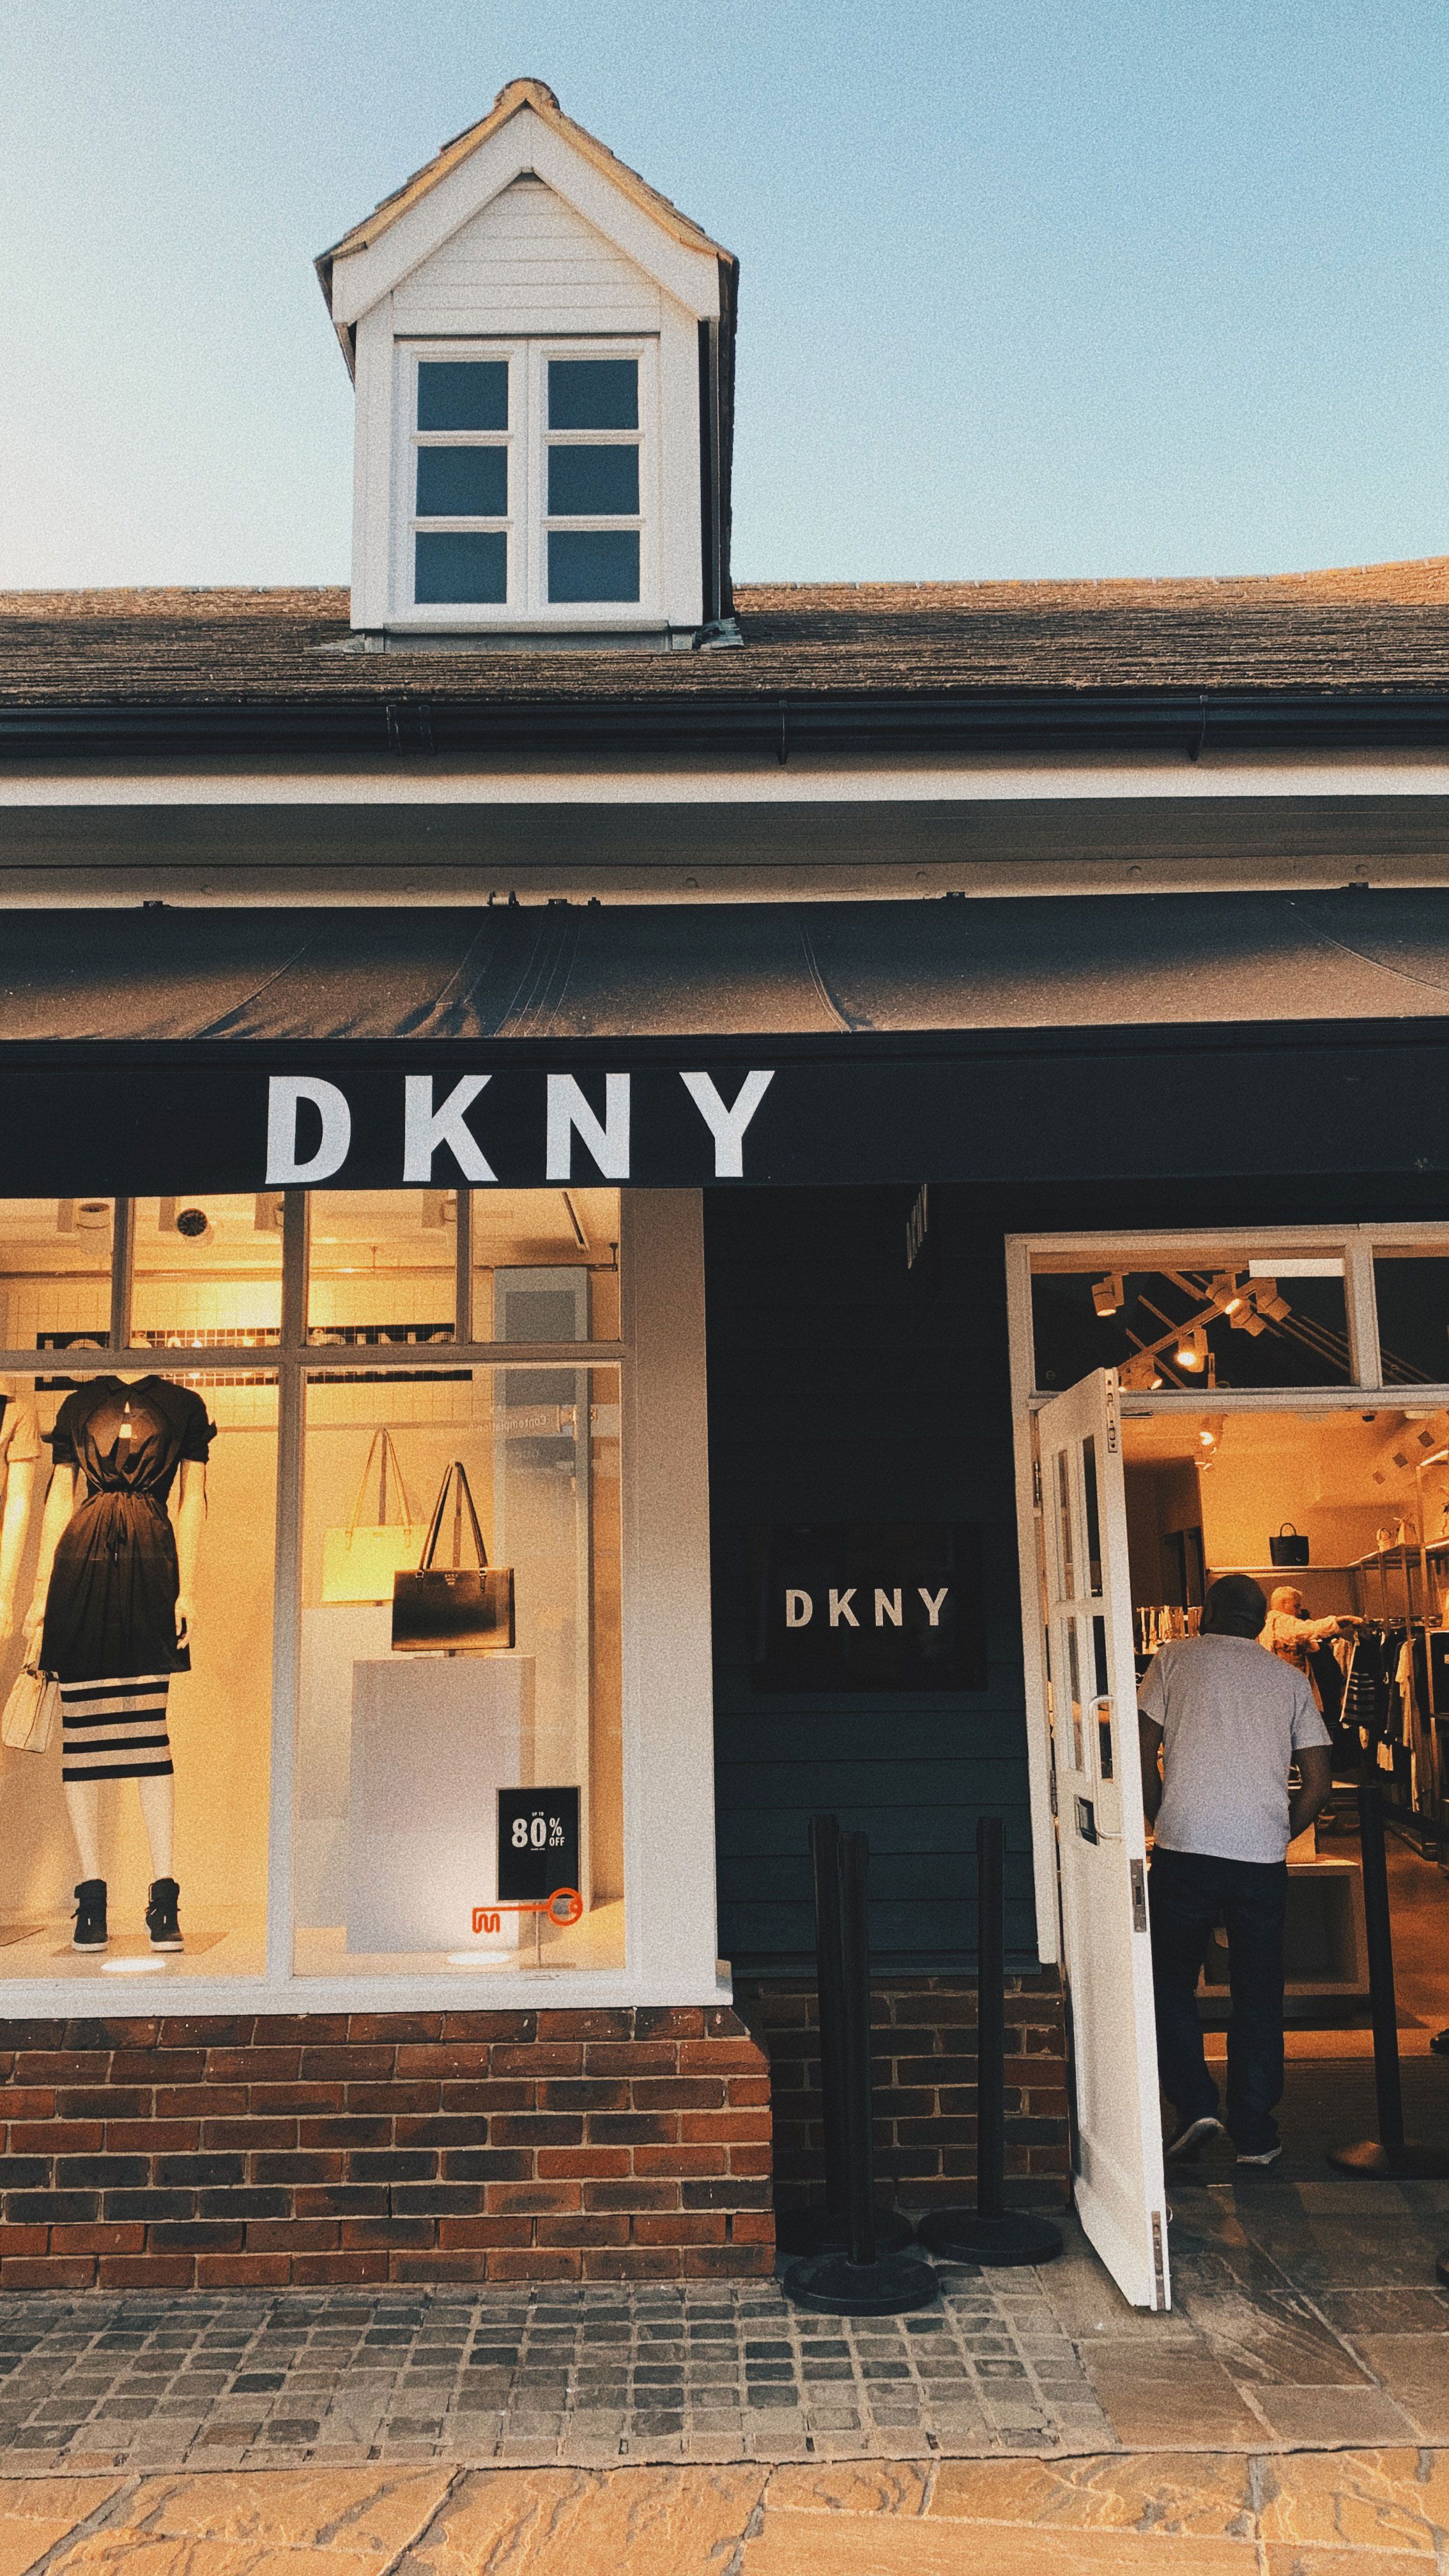 Dkny Store In Bicester Village Shopping England Bicestervillage